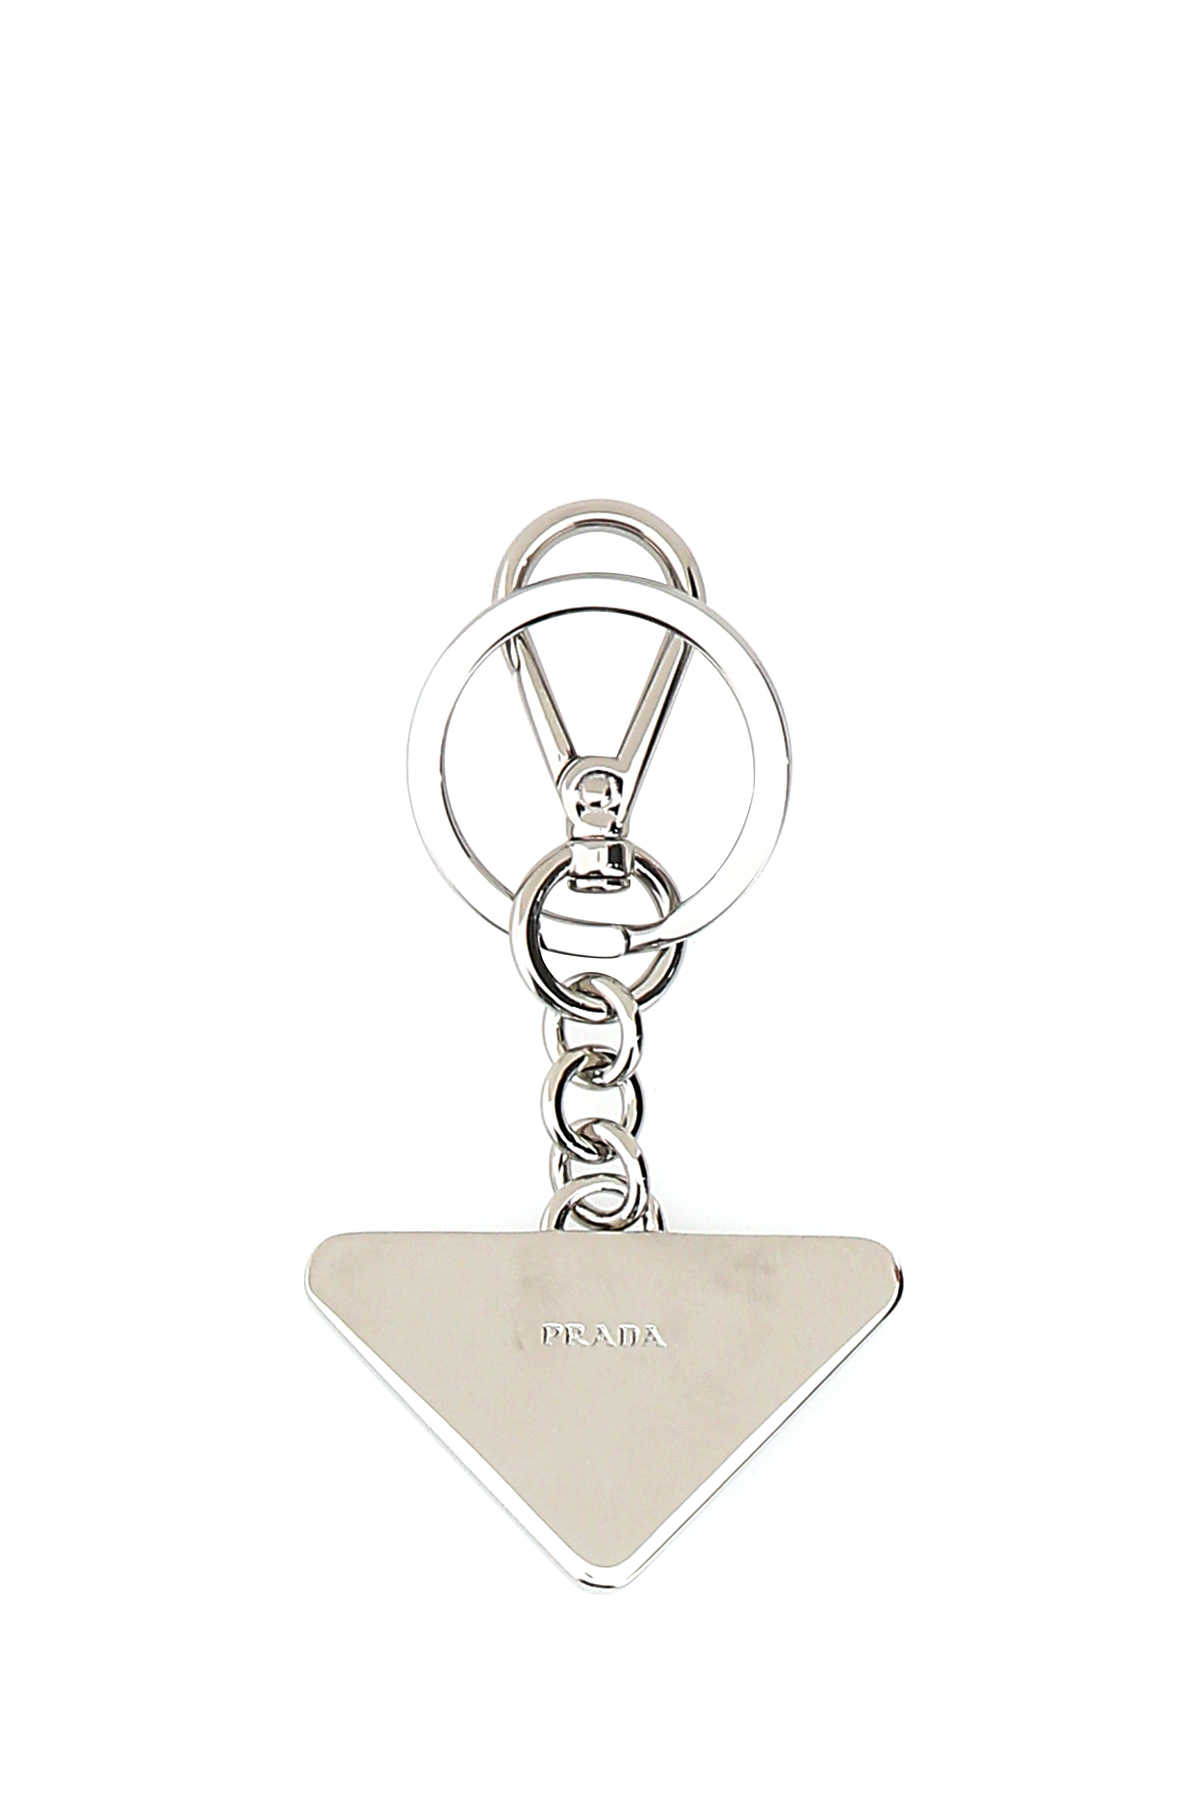 Prada Two-tone Leather And Metal Keychain In F0002